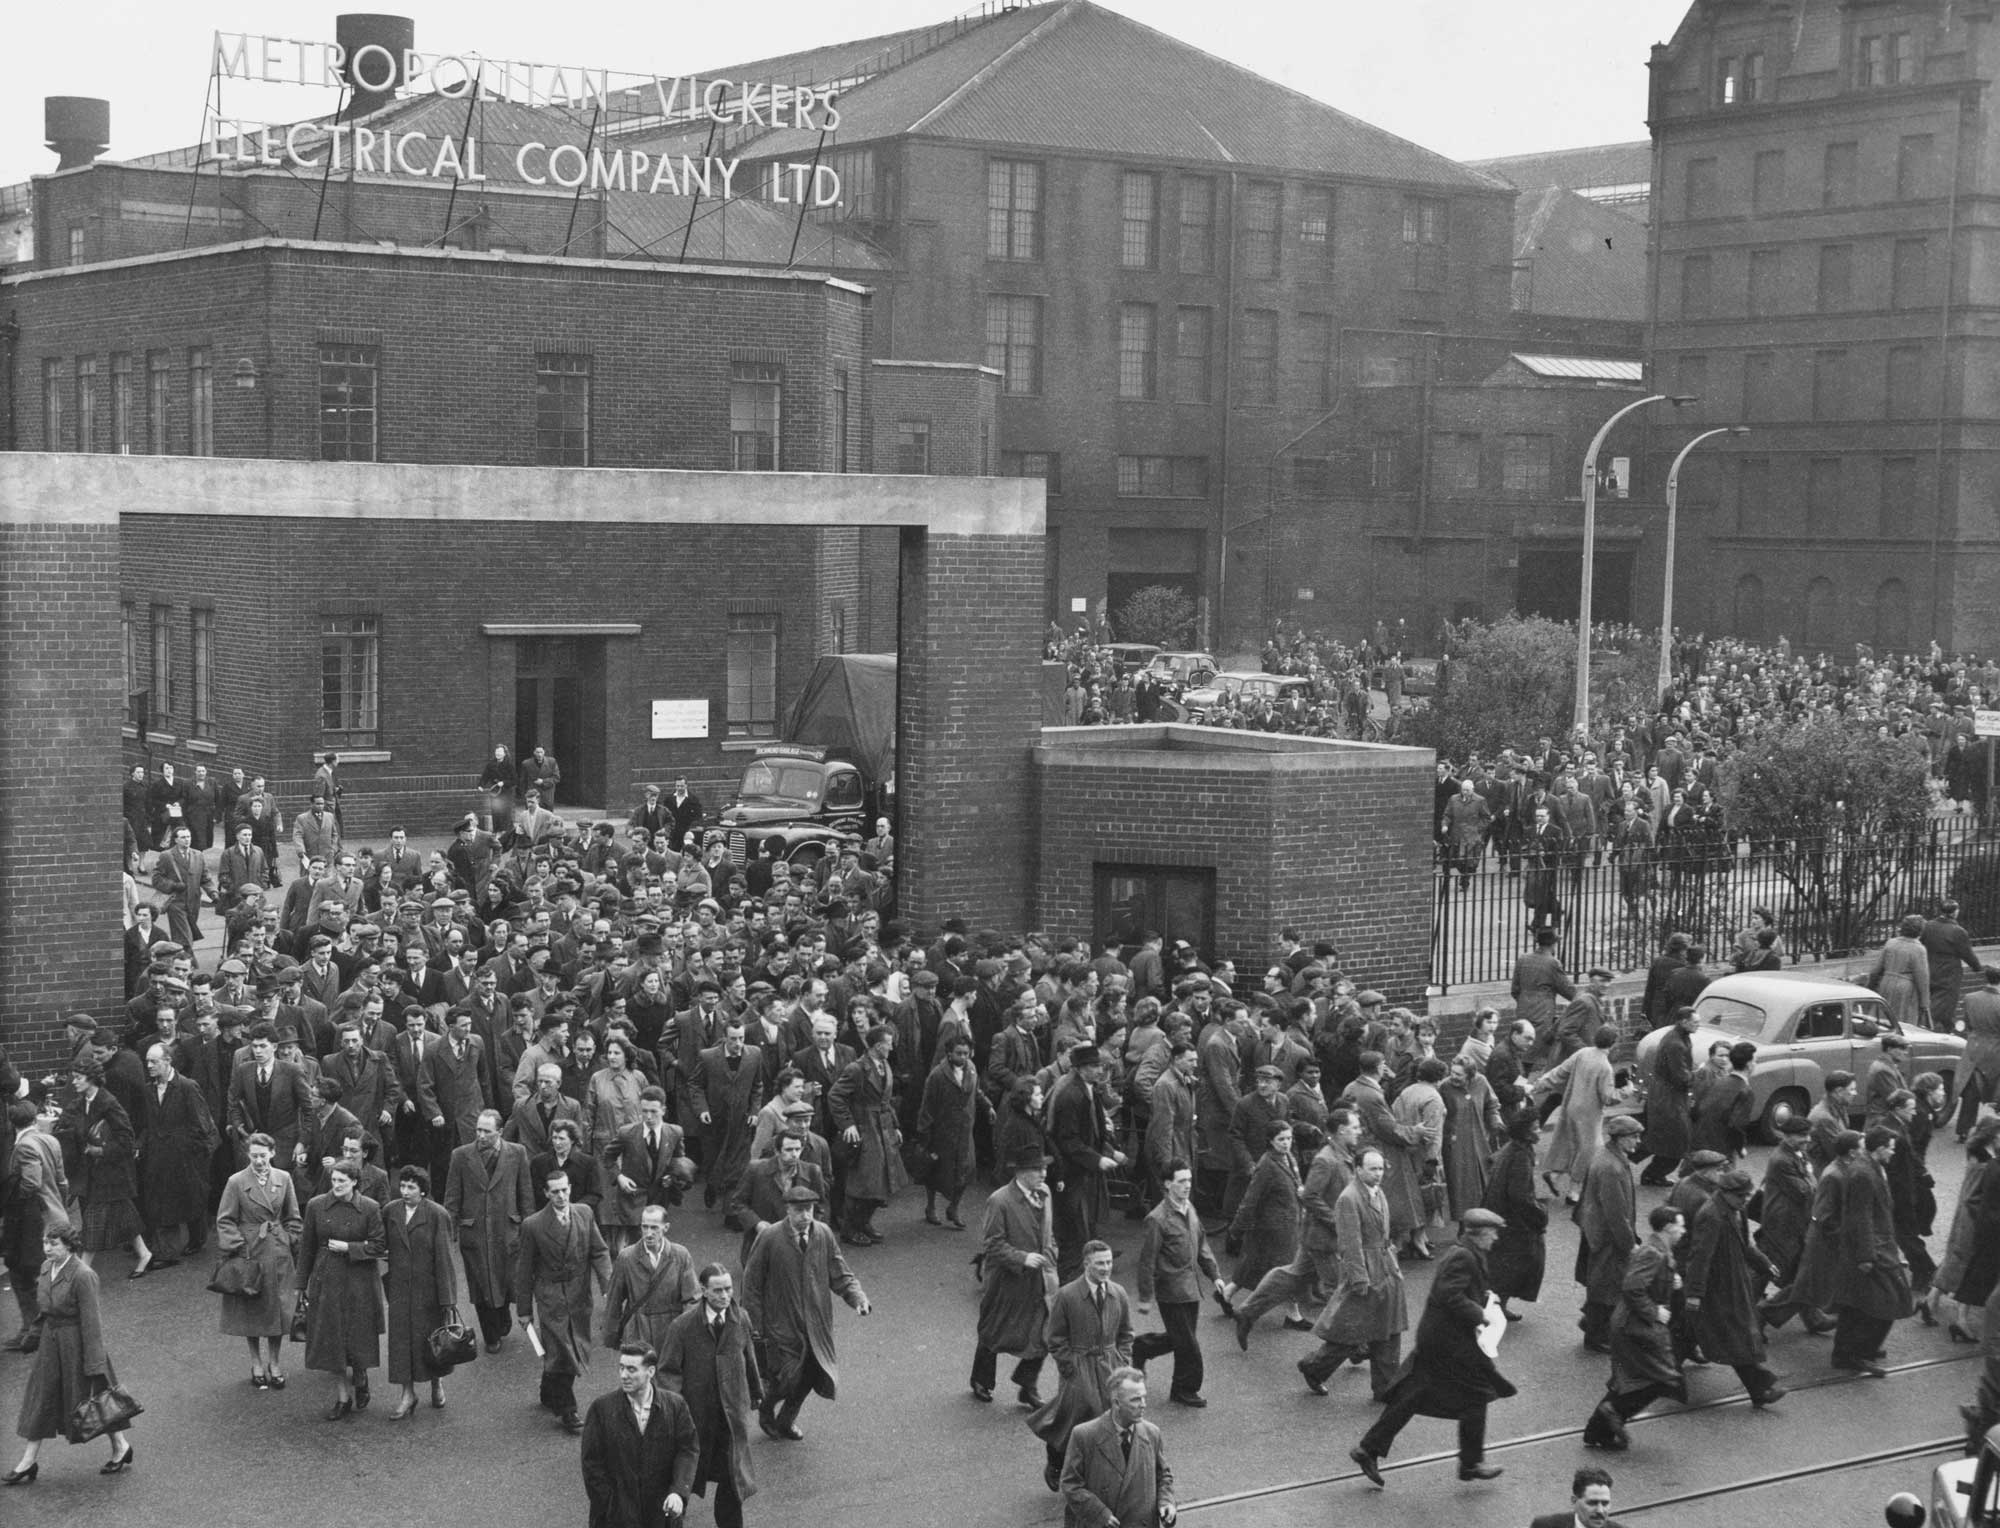 Black and white image of a large crowd of people leaving a factory